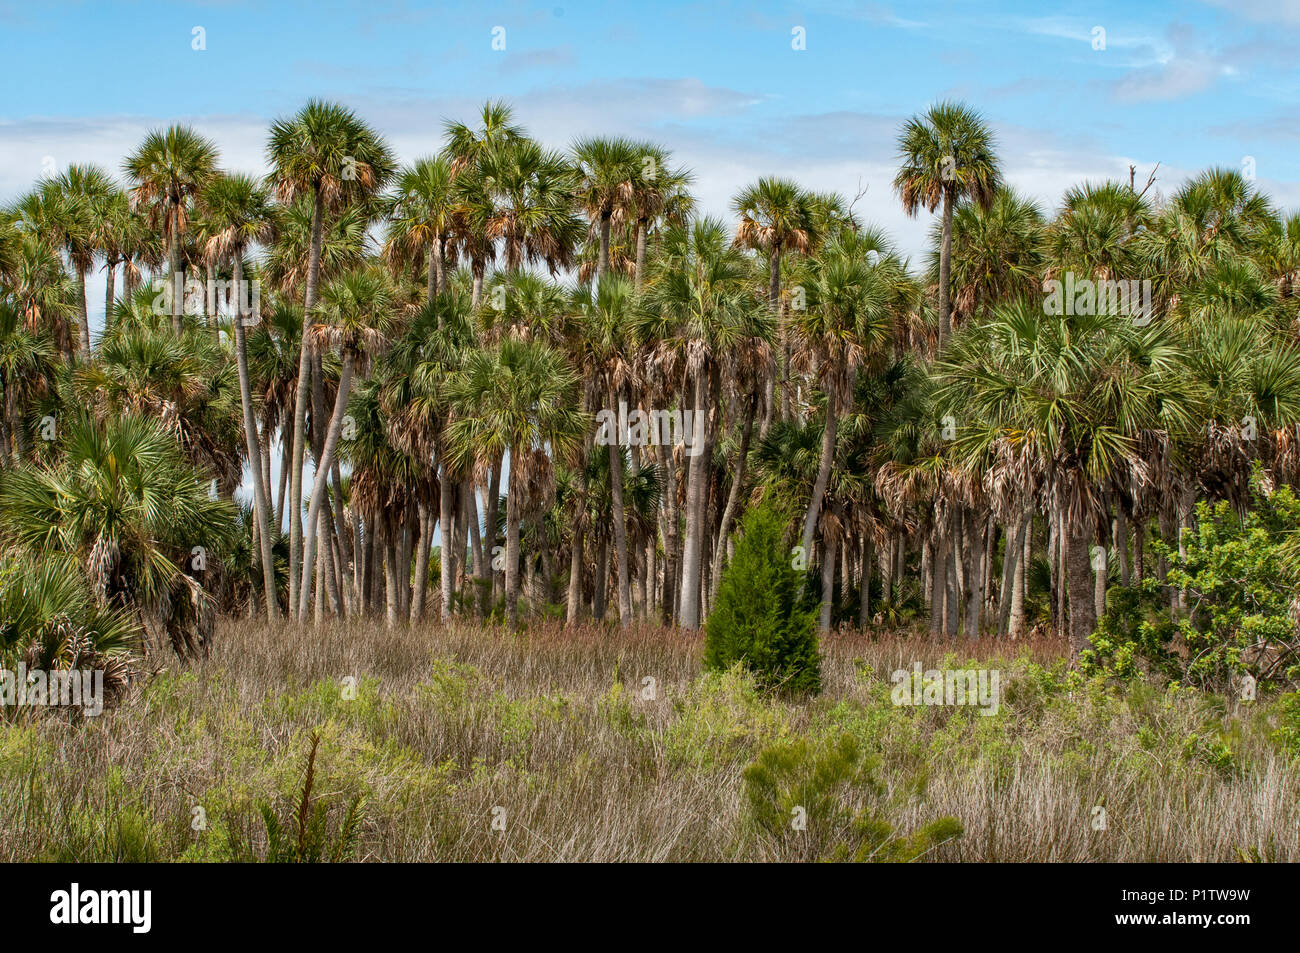 Large stand of pine trees in lowland of Florida. Stock Photo